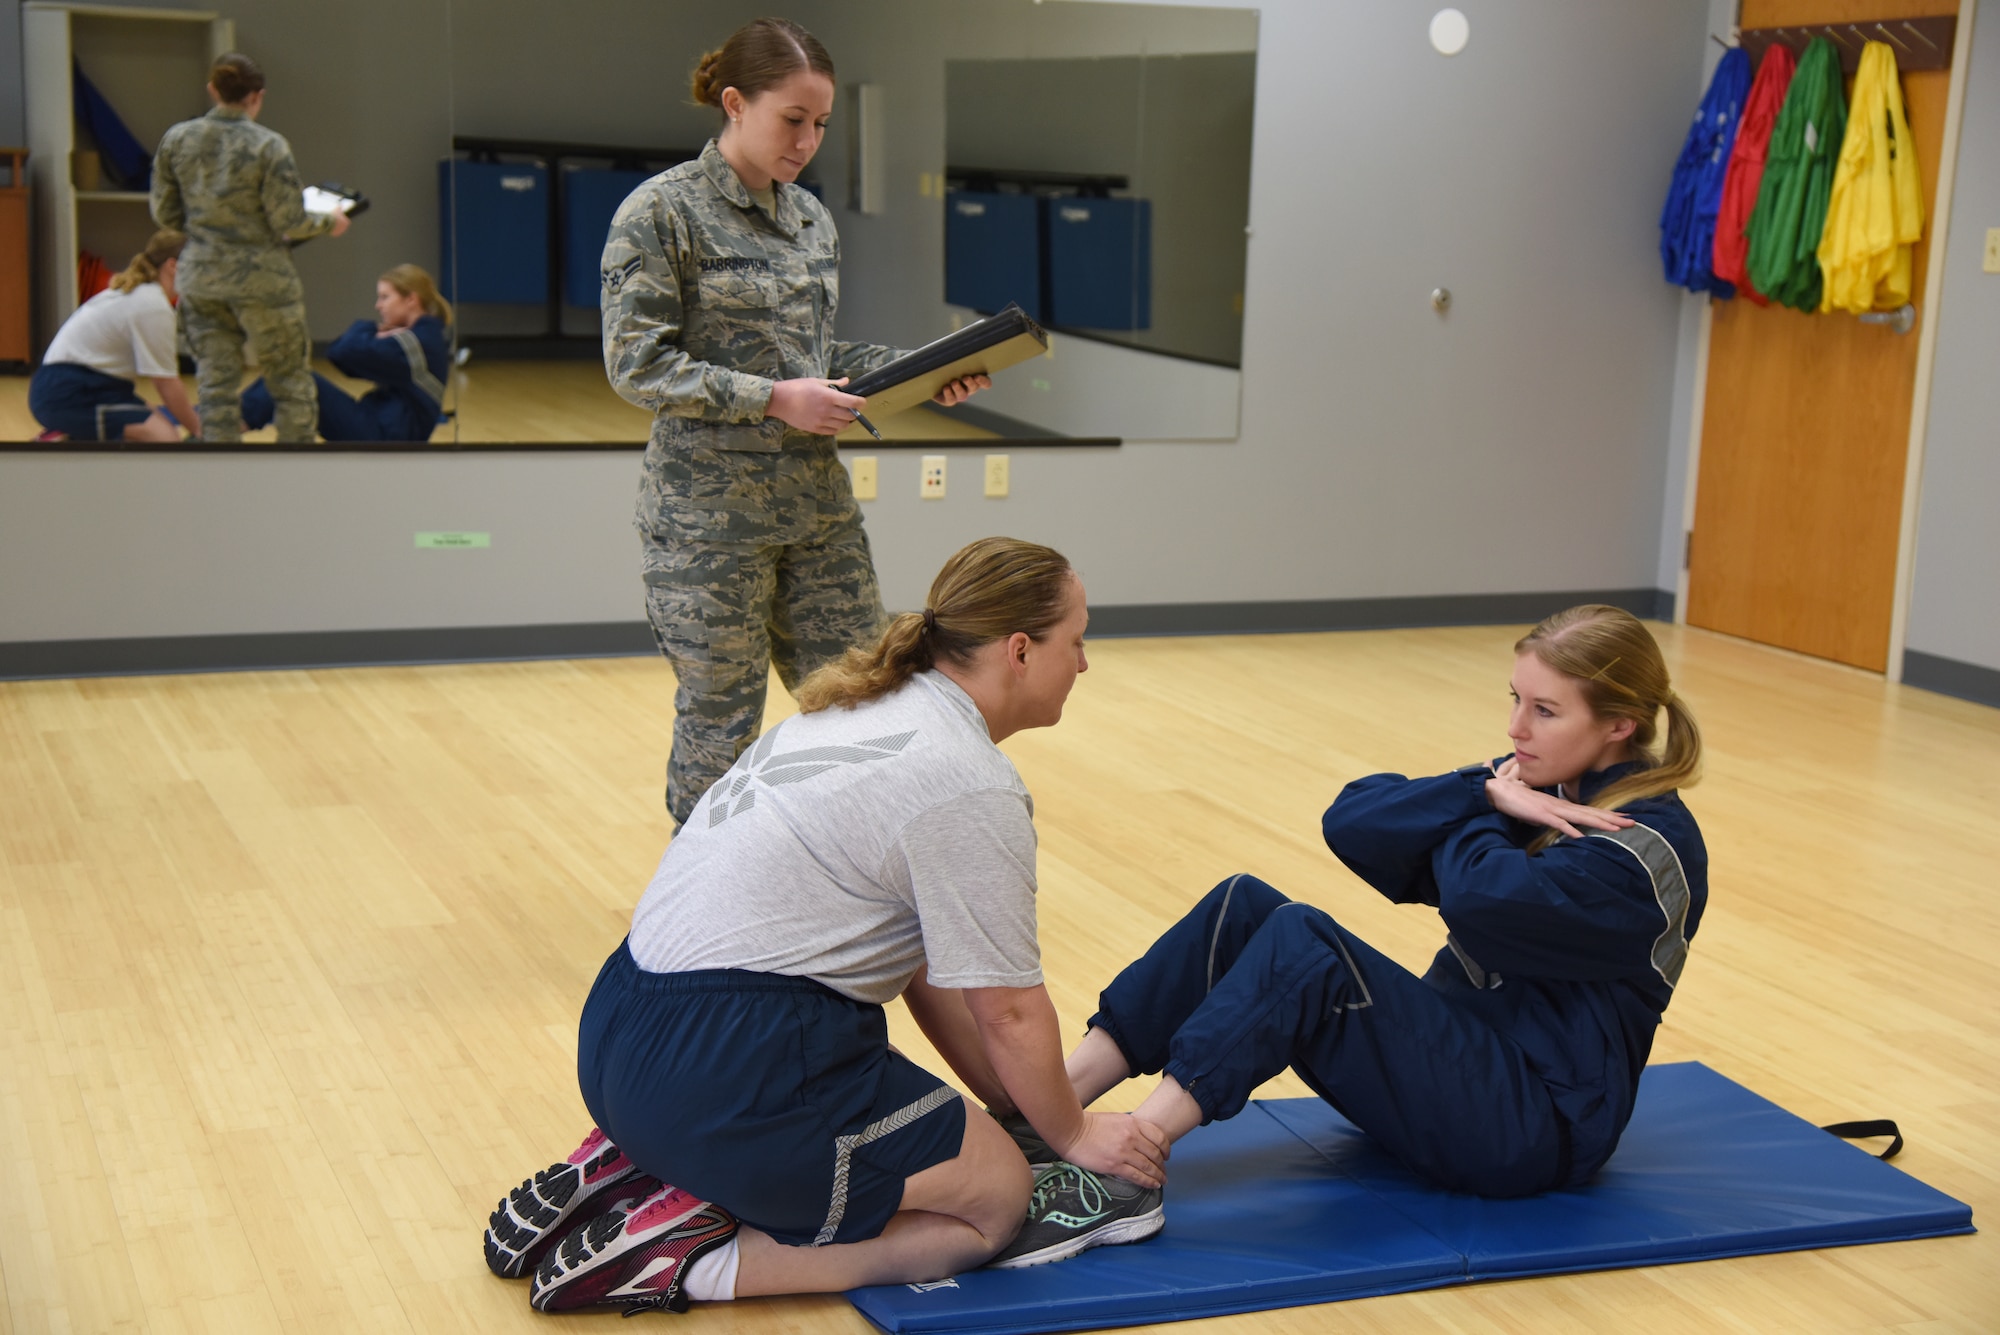 U.S. Air Force Airman 1st Class Alexus Barrington, 81st Inpatient Operation Squadron aerospace medical technician and physical training leader, counts the number of push-ups that Senior Airman Rebecca Fentress, 81st Security Forces Squadron investigator, completes as Senior Master Sgt. Rebecca Janssen, 85th Engineering Installation Squadron operations flight chief, holds her feet inside the new fitness assessment cell building at Keesler Air Force Base, Mississippi, March 4, 2019. The FAC moved to a new location, building 4104, near the Dragon Fitness Center, to better suit Keesler's fitness needs by enhancing the options for members when choosing where they're most comfortable accomplishing the aerobic component of the test. Airmen are now able to choose between using either the Crotwell Track or the Triangle Track. Staff Sgt. Aron Alt, 81st Force Support Squadron fitness assessment cell NCO in charge, said he thinks the customer service environment as a whole will be better and that when you show Airmen you care about them they tend to give a better over all performance. (U.S. Air Force photo by Kemberly Groue)